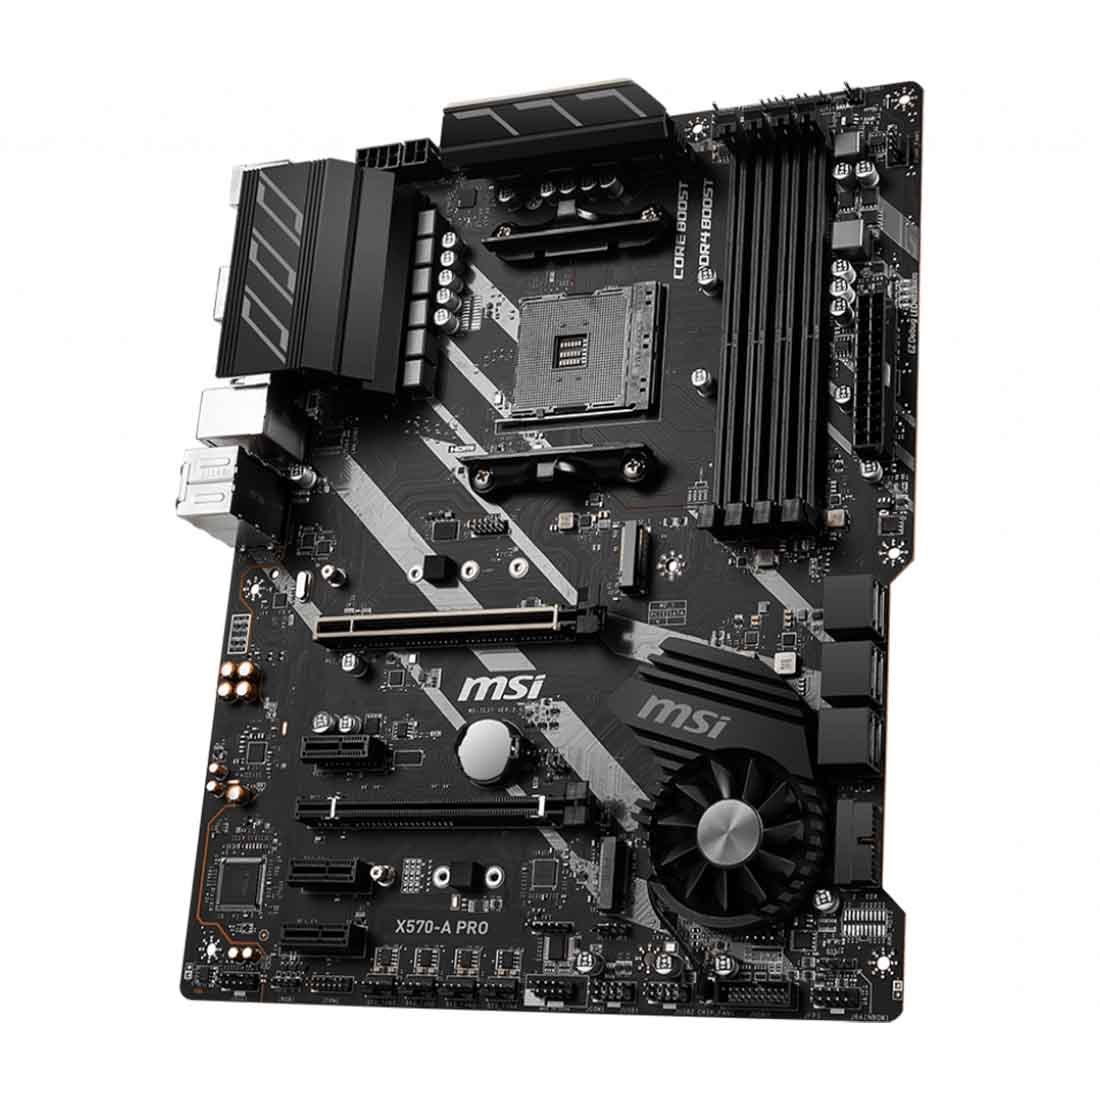 MSI X570-A Pro AMD AM4 Socket  ATX Gaming Motherboard with PCIe 4.0 and M.2